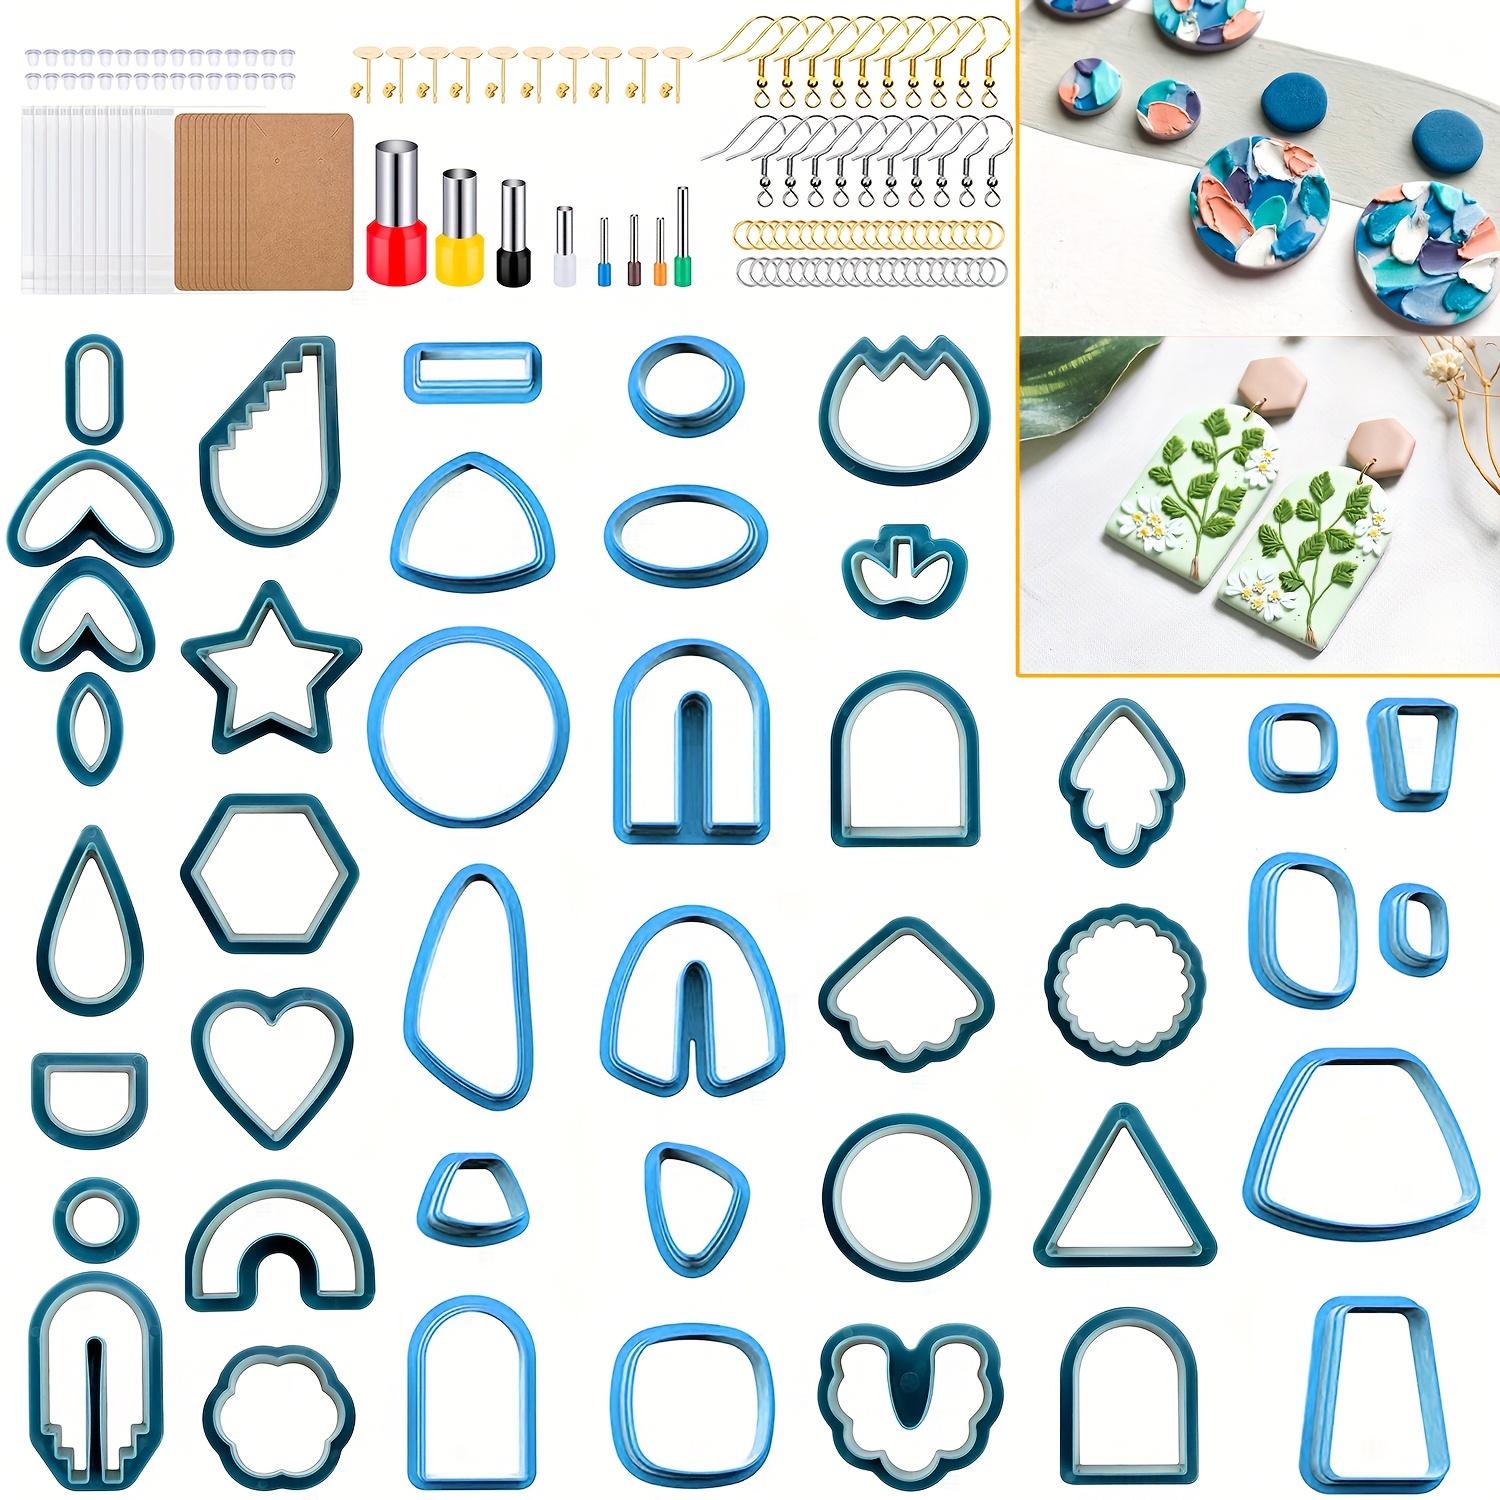 24pcs Clay Earring Cutters Set for Polymer Clay Jewelry Making